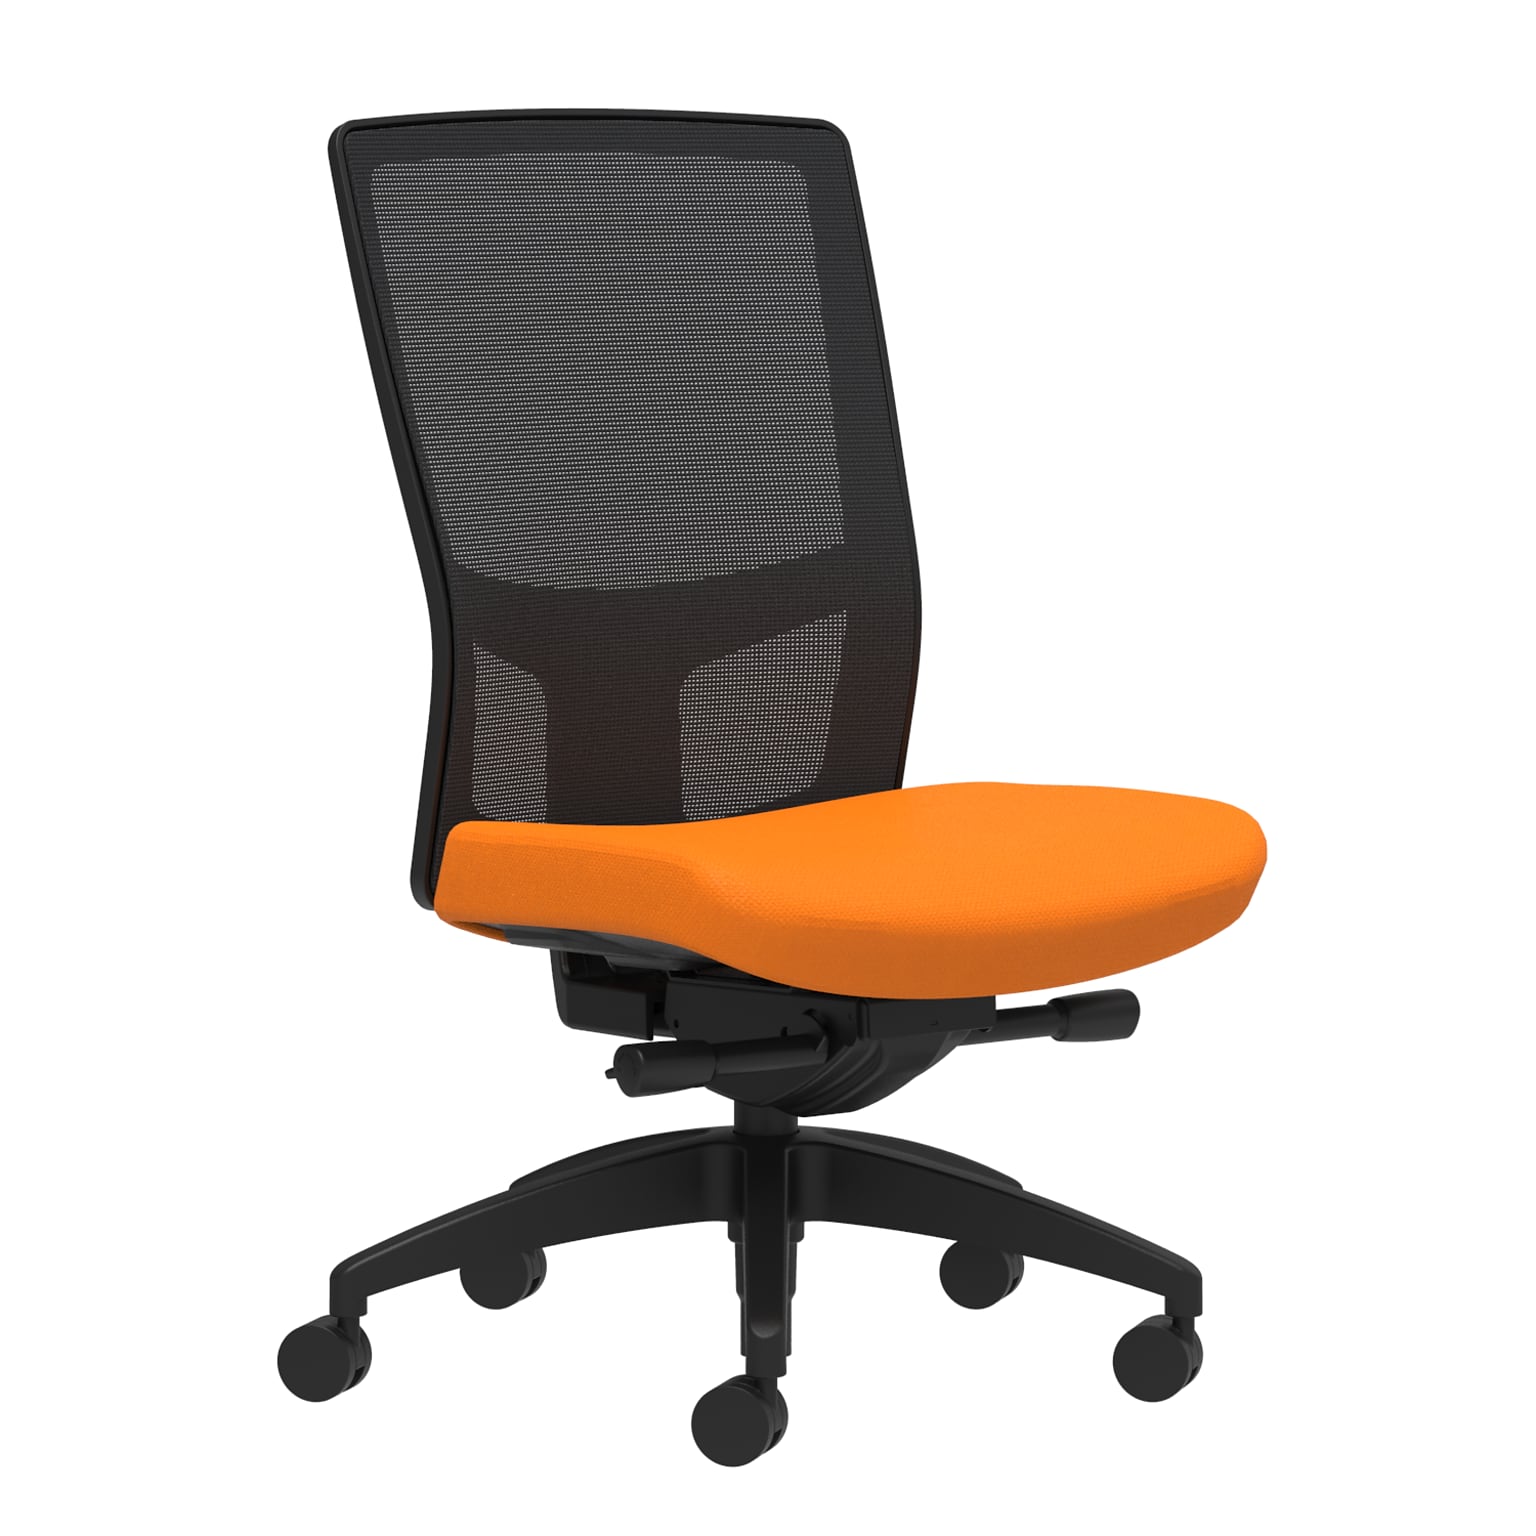 Union & Scale Workplace2.0™ Fabric Task Chair, Apricot, Integrated Lumbar, Armless, Advanced Synchro-Tilt Seat Control (53650)